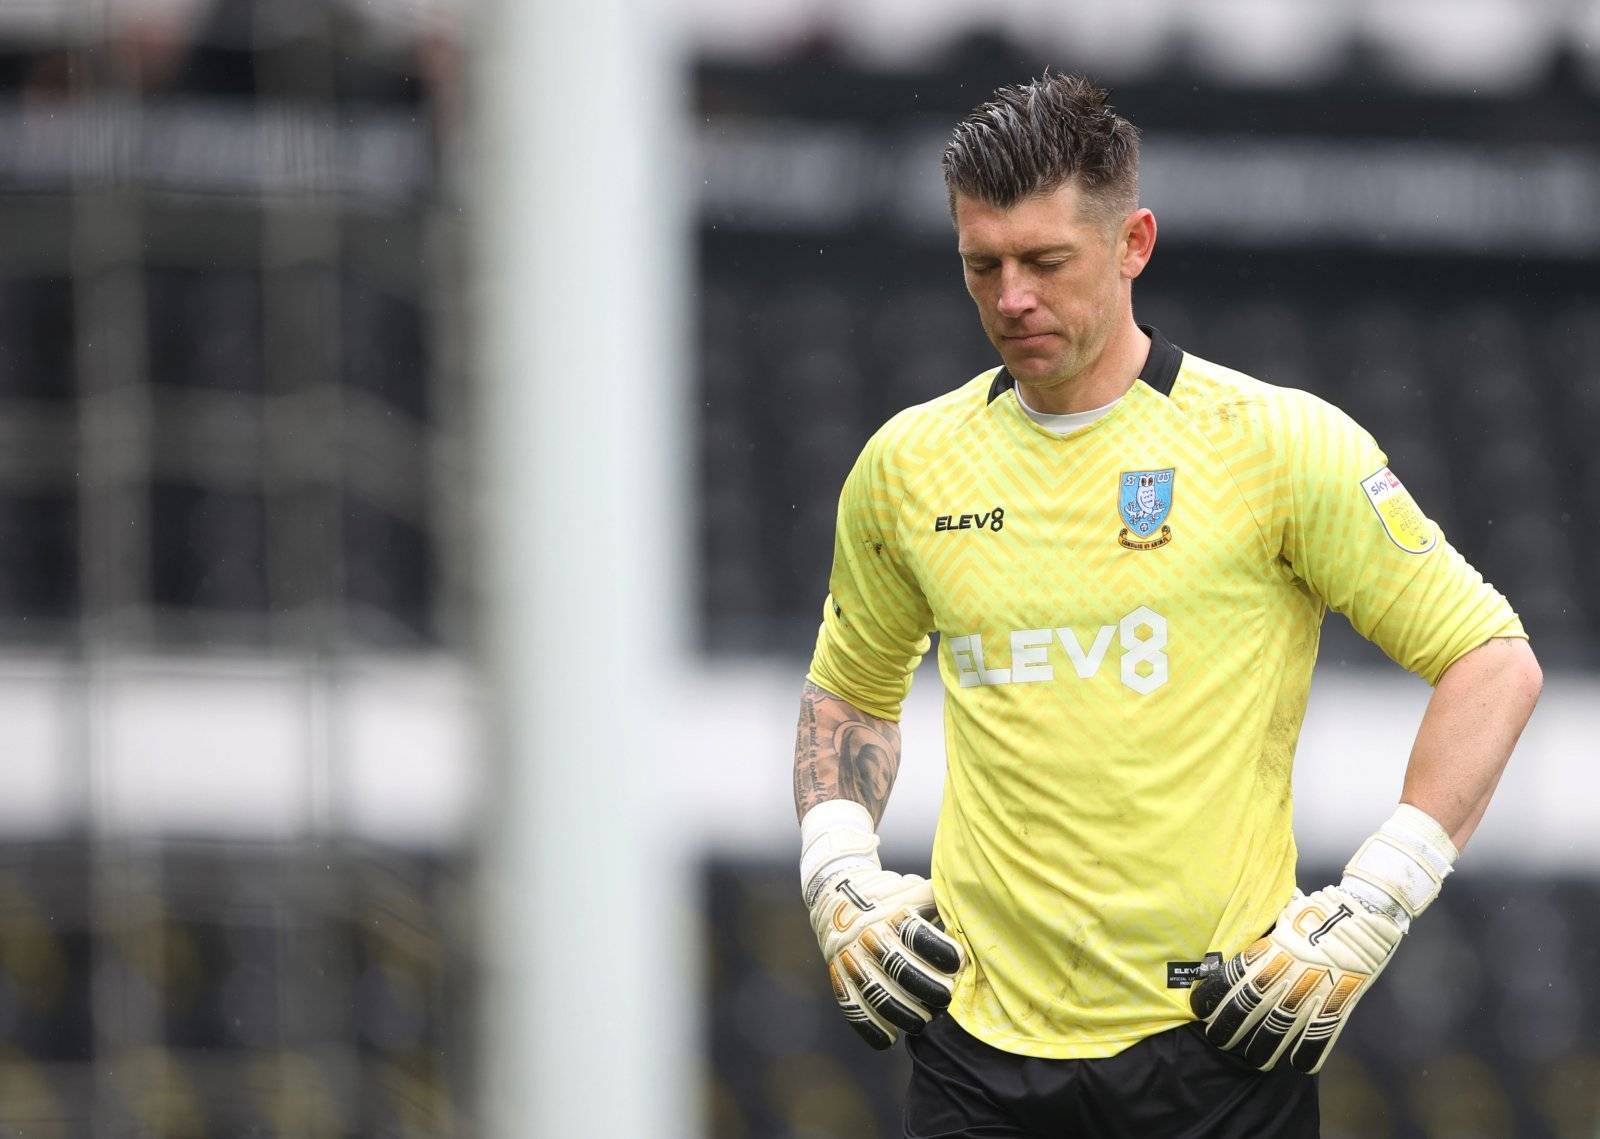 Exclusive: Ex-Sheffield Wednesday midfielder backs decision to let Westwood go - Exclusive